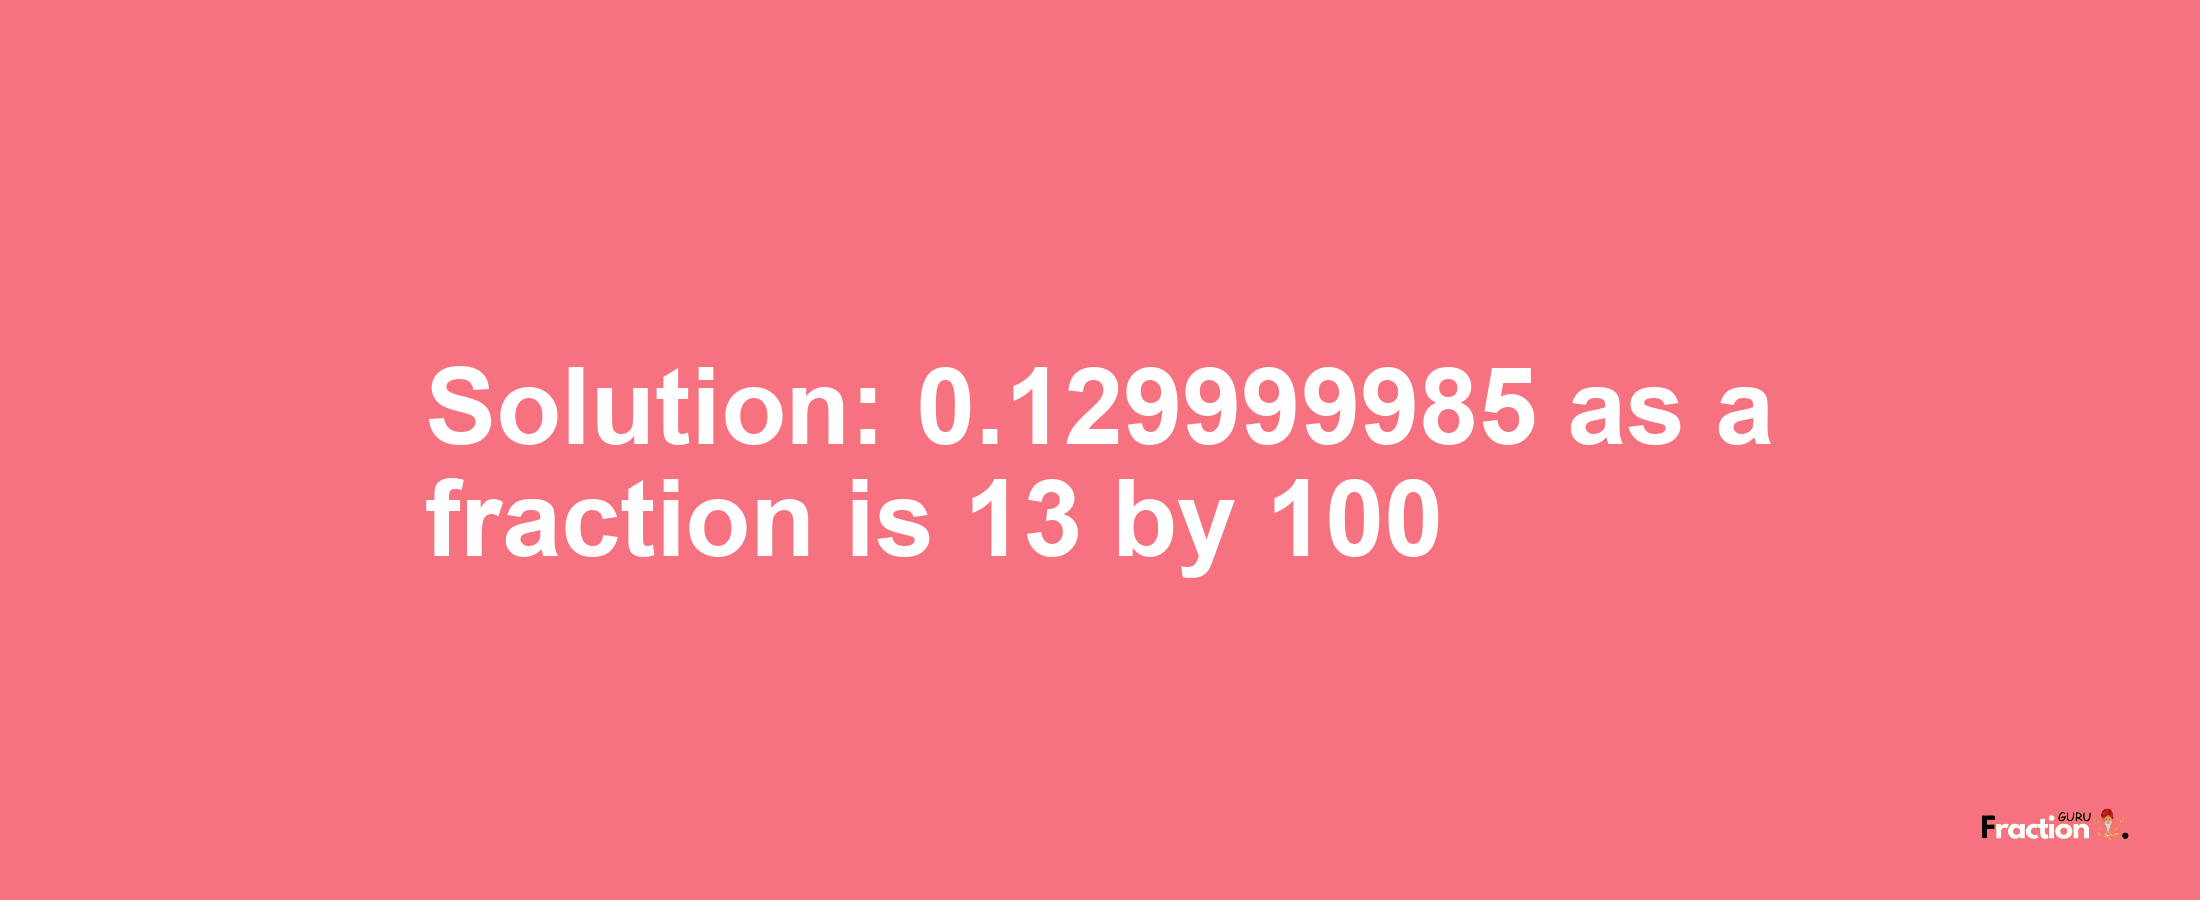 Solution:0.129999985 as a fraction is 13/100